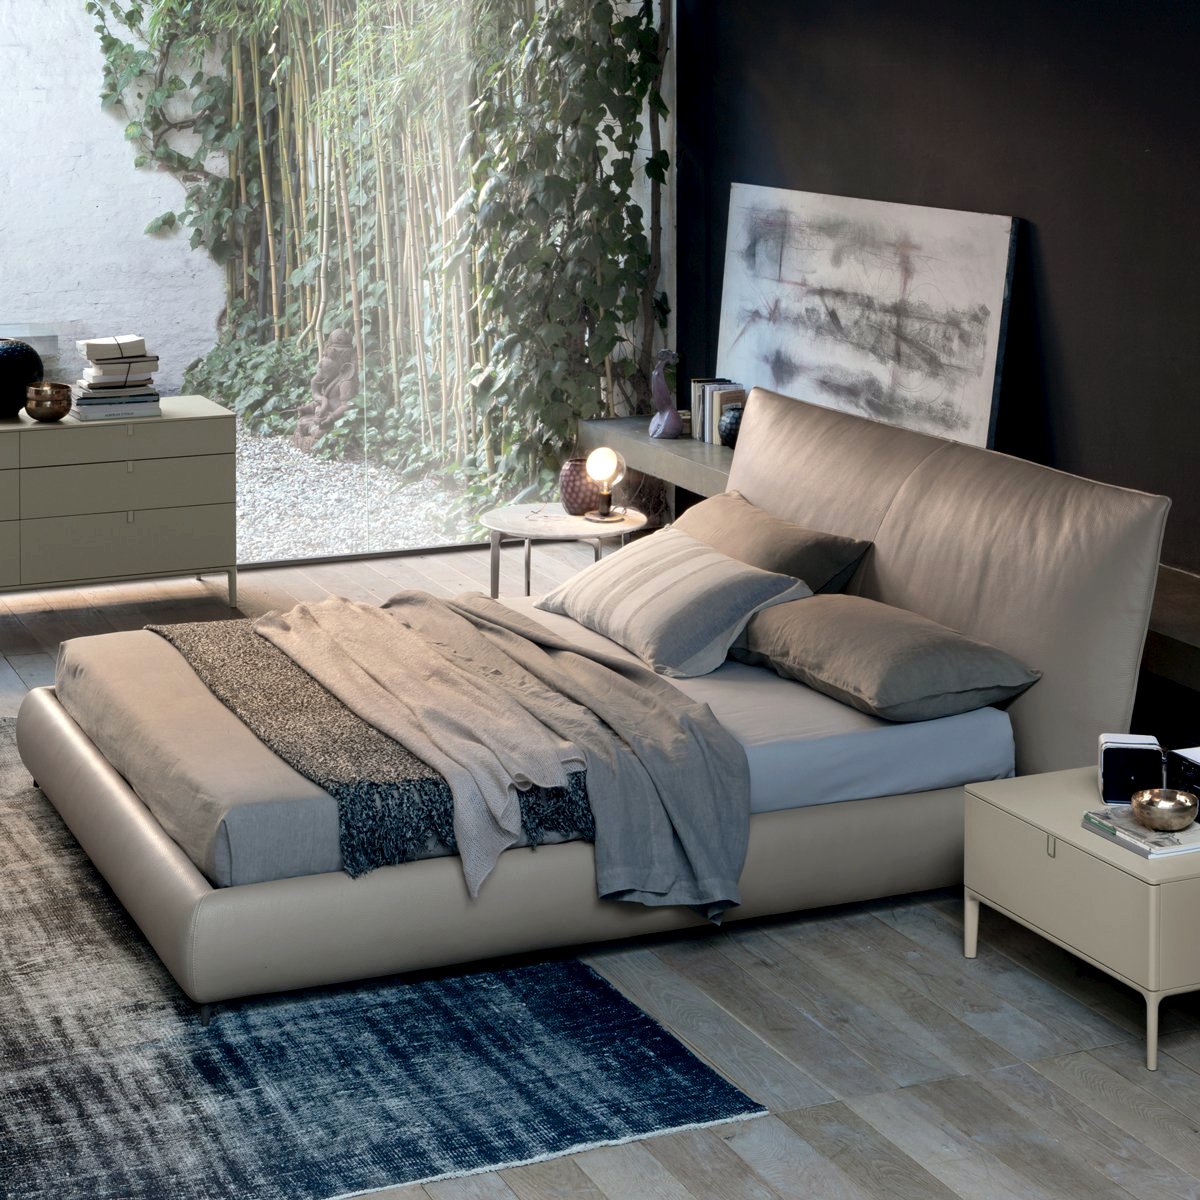 Suite Leather Bed | Urban Avenue